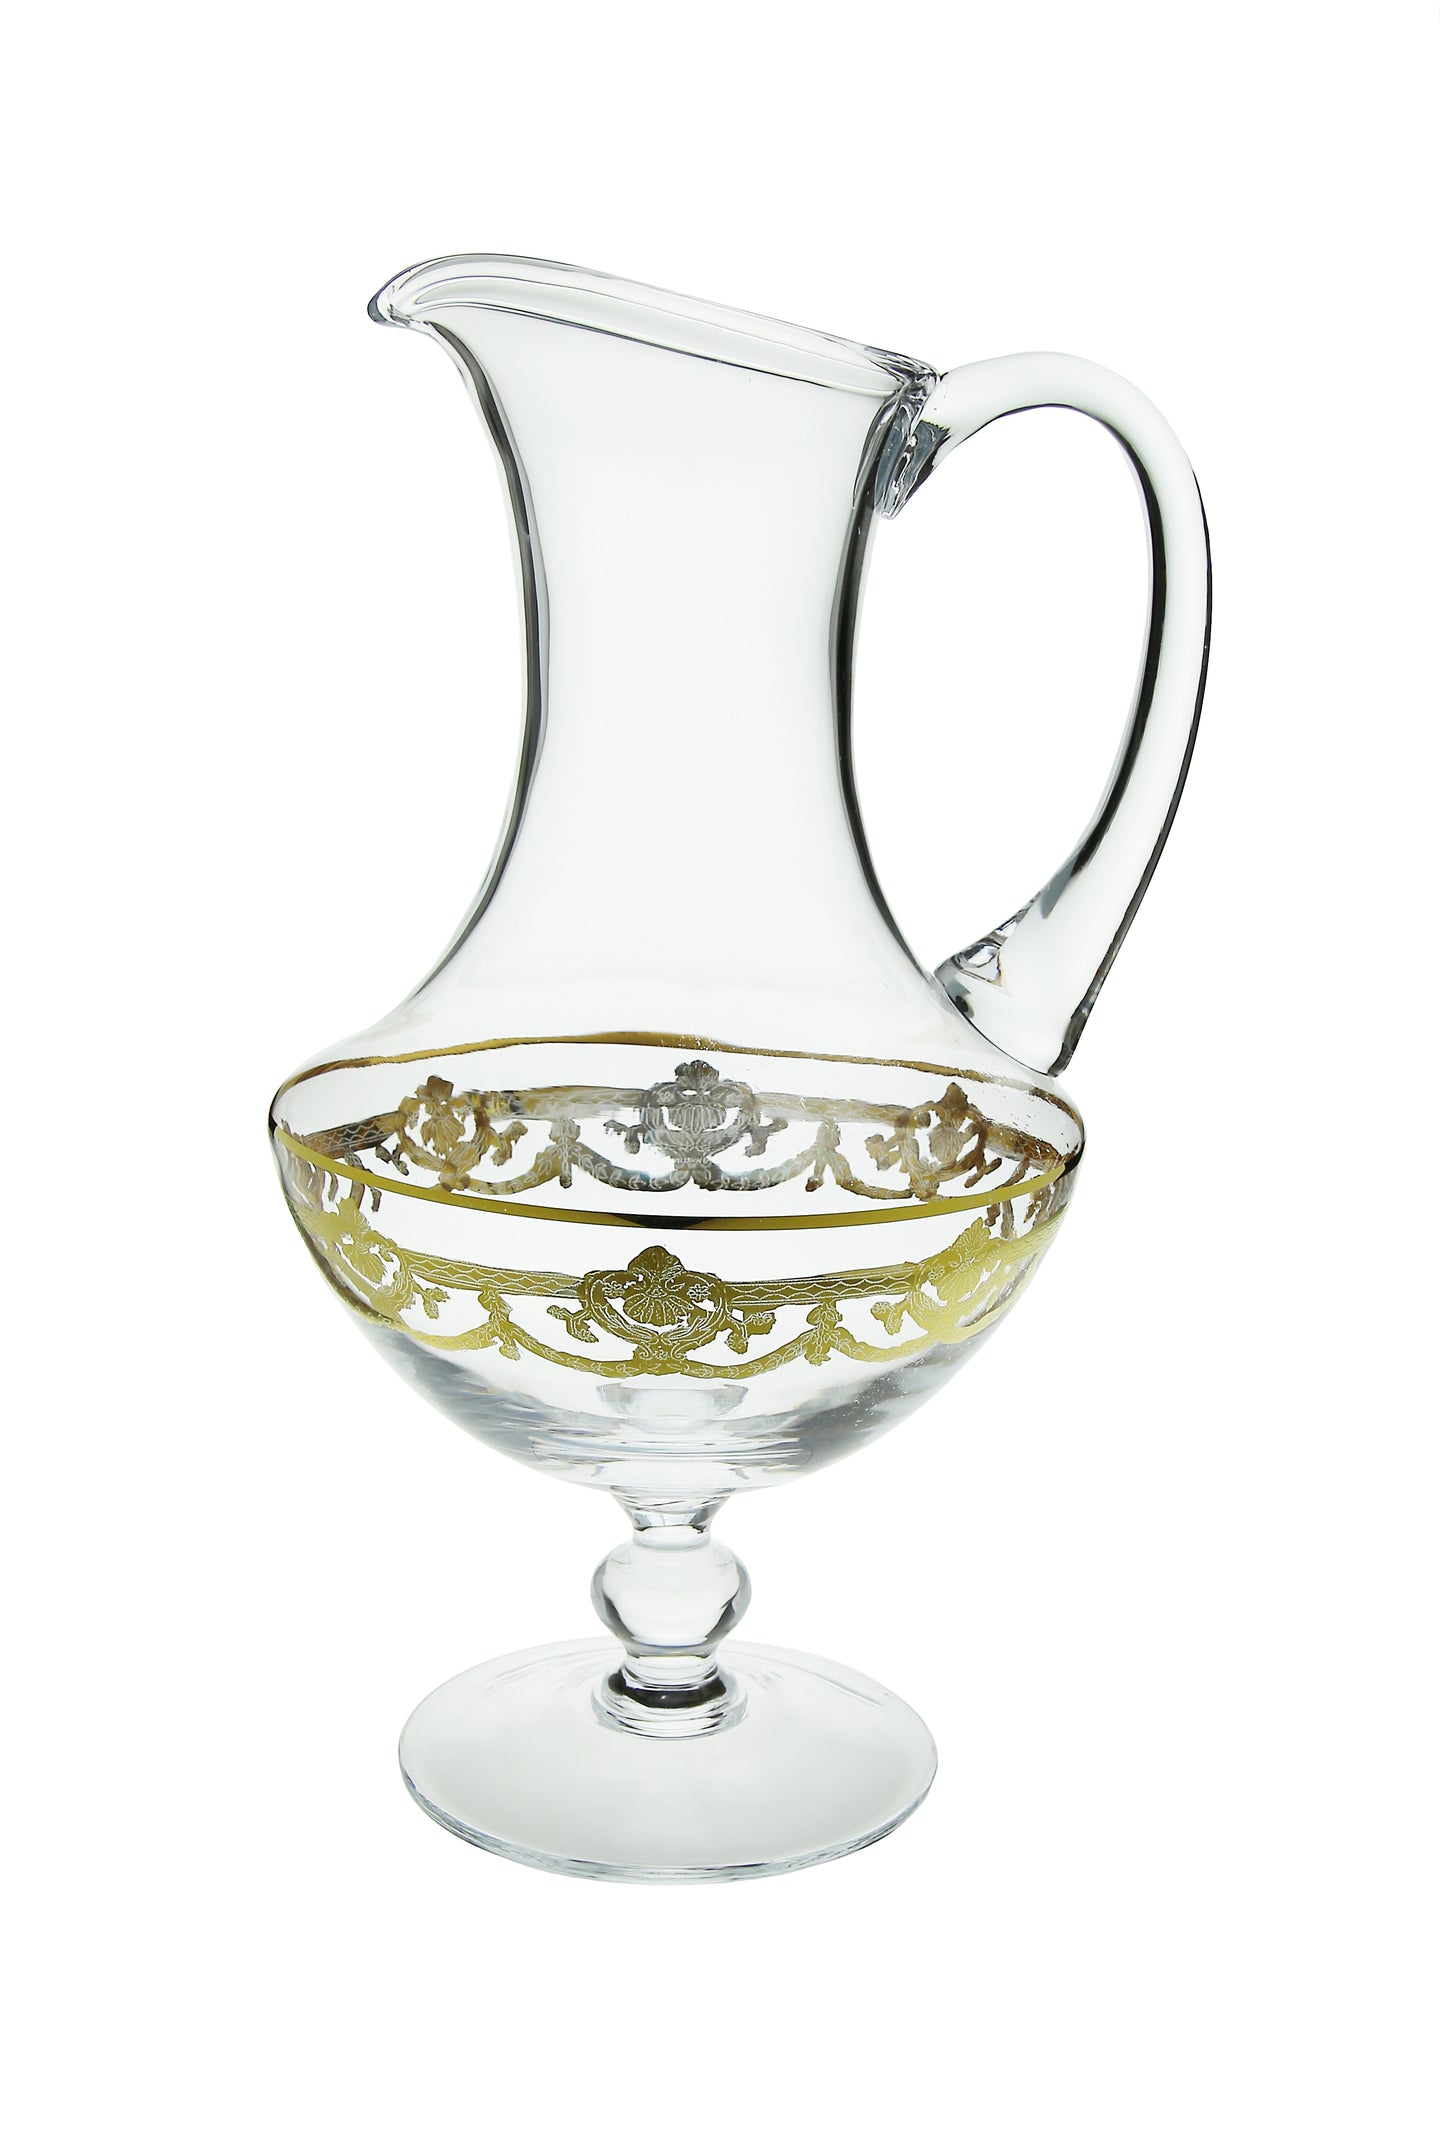 Water pitcher with 14K Gold Artwork-Traditional design